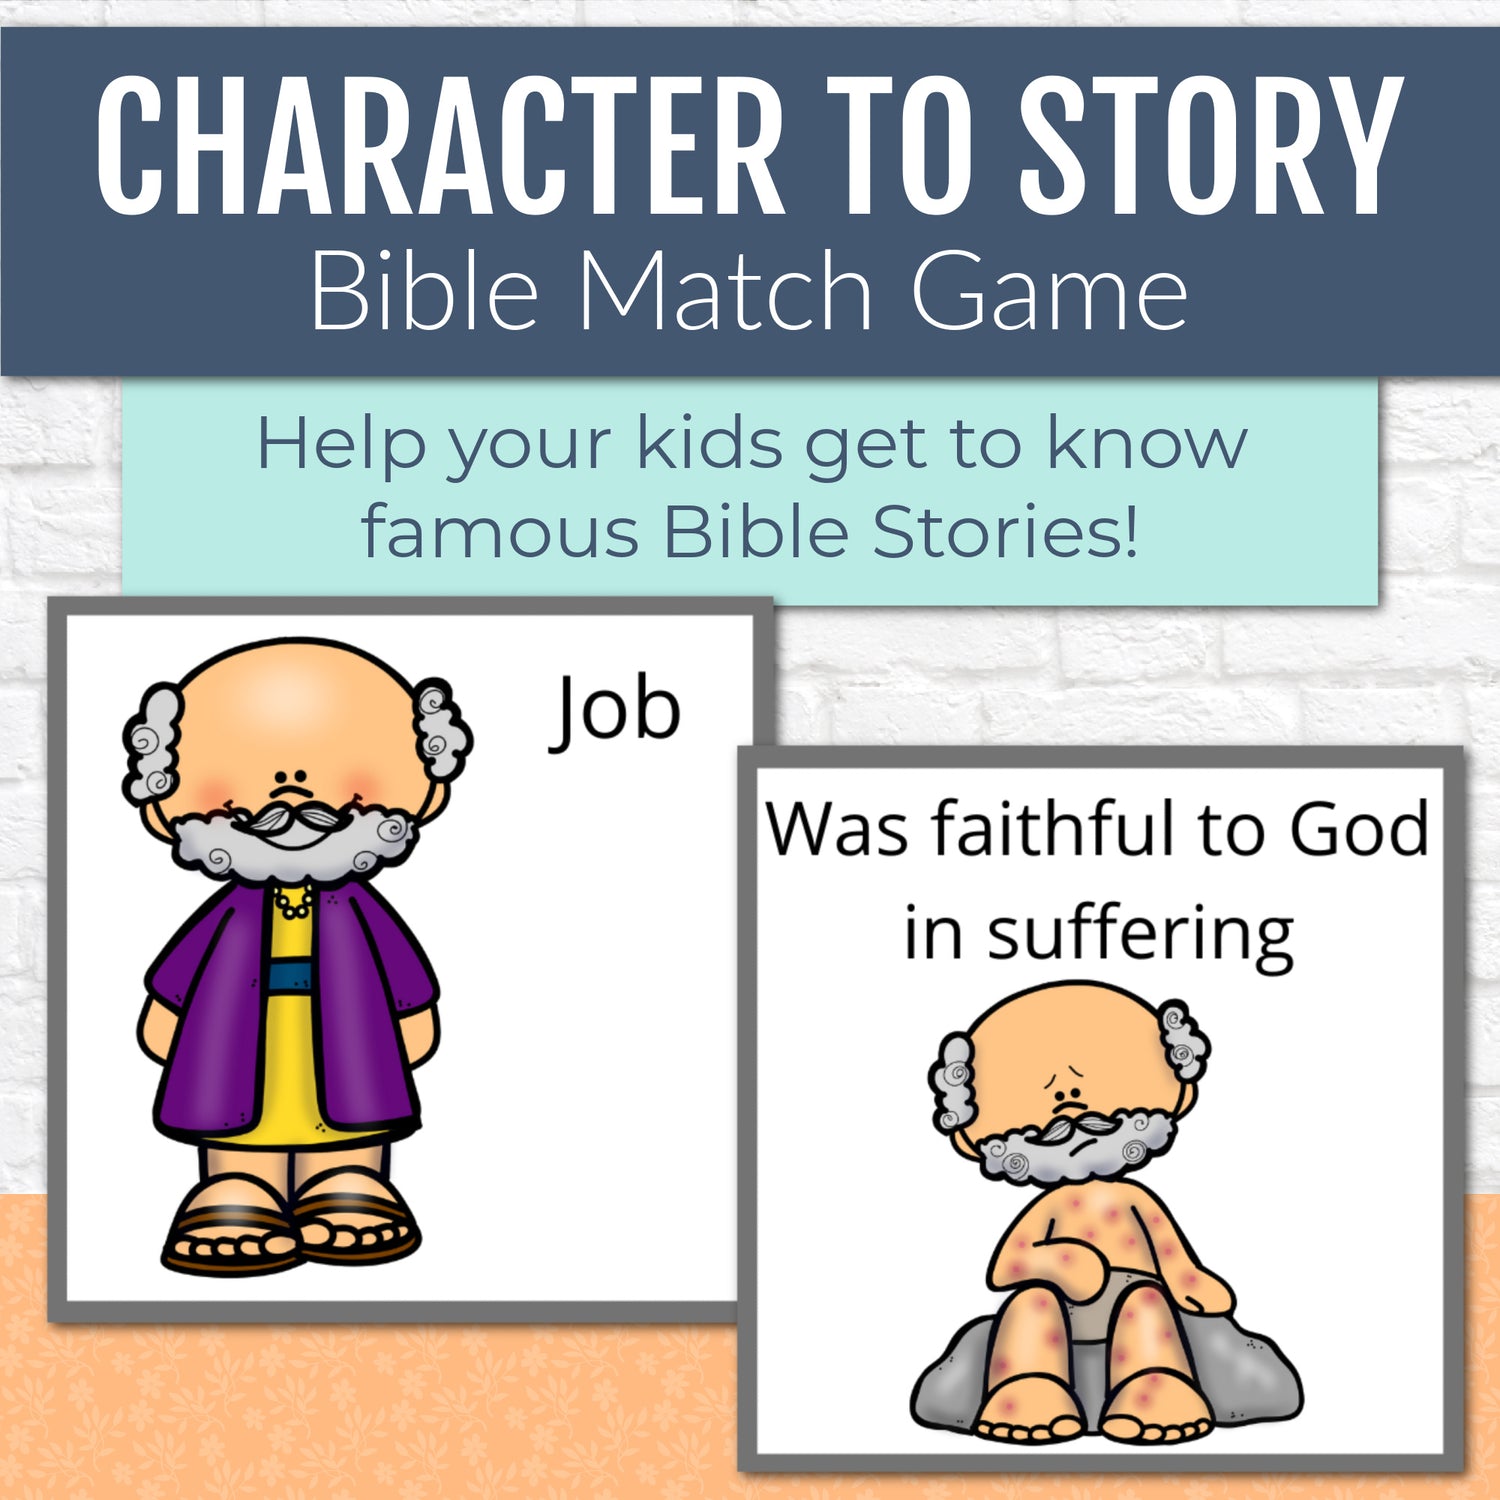 Bible Match Game - Bible Memory Game to Learn Famous Bible People and Stories